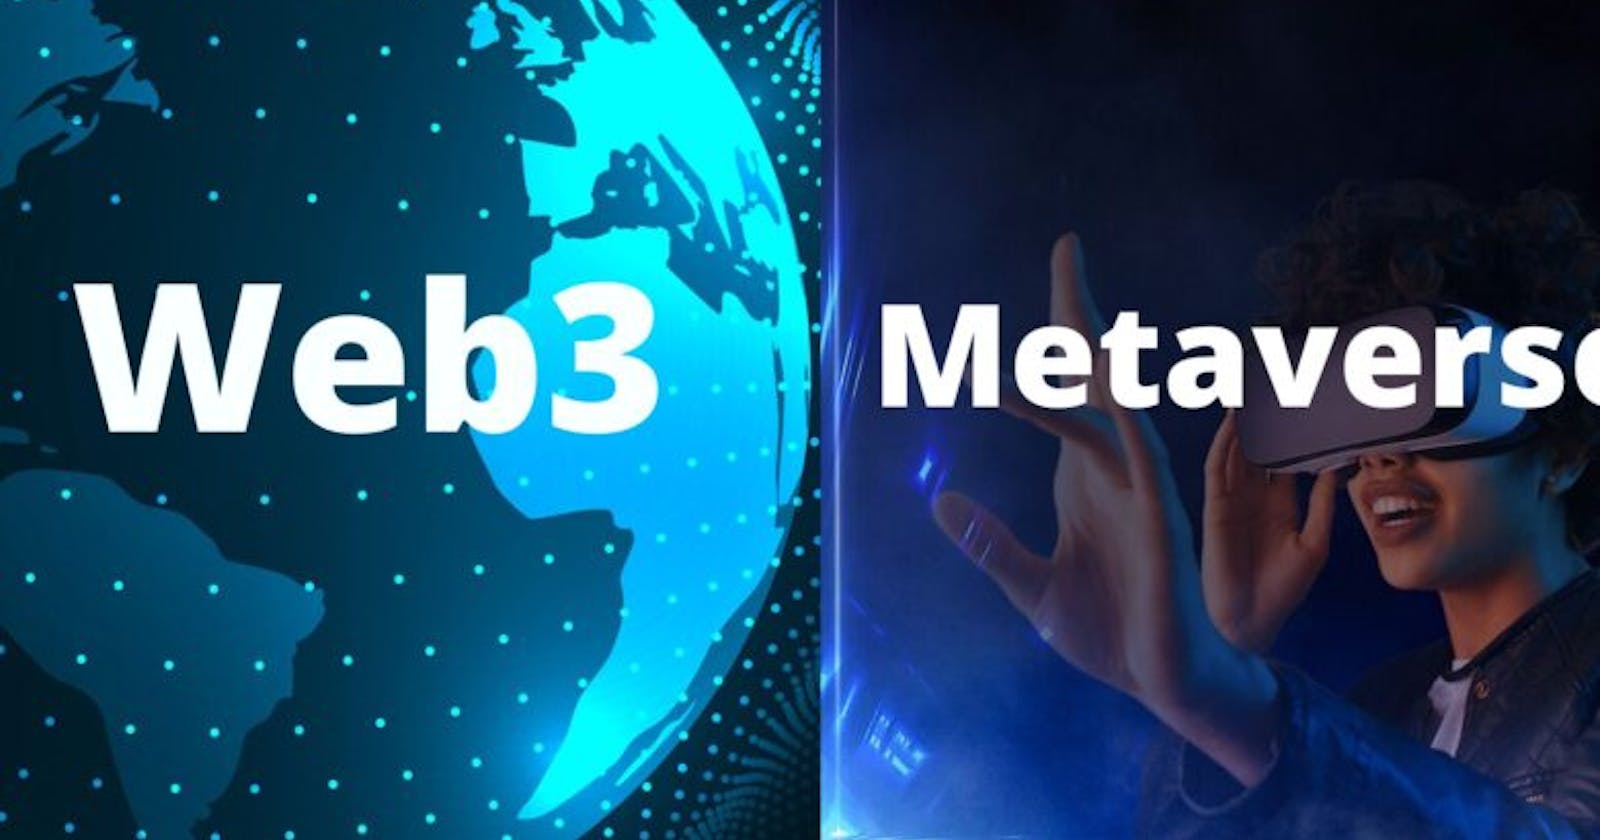 Differences and similarities between Web3 and Metaverse